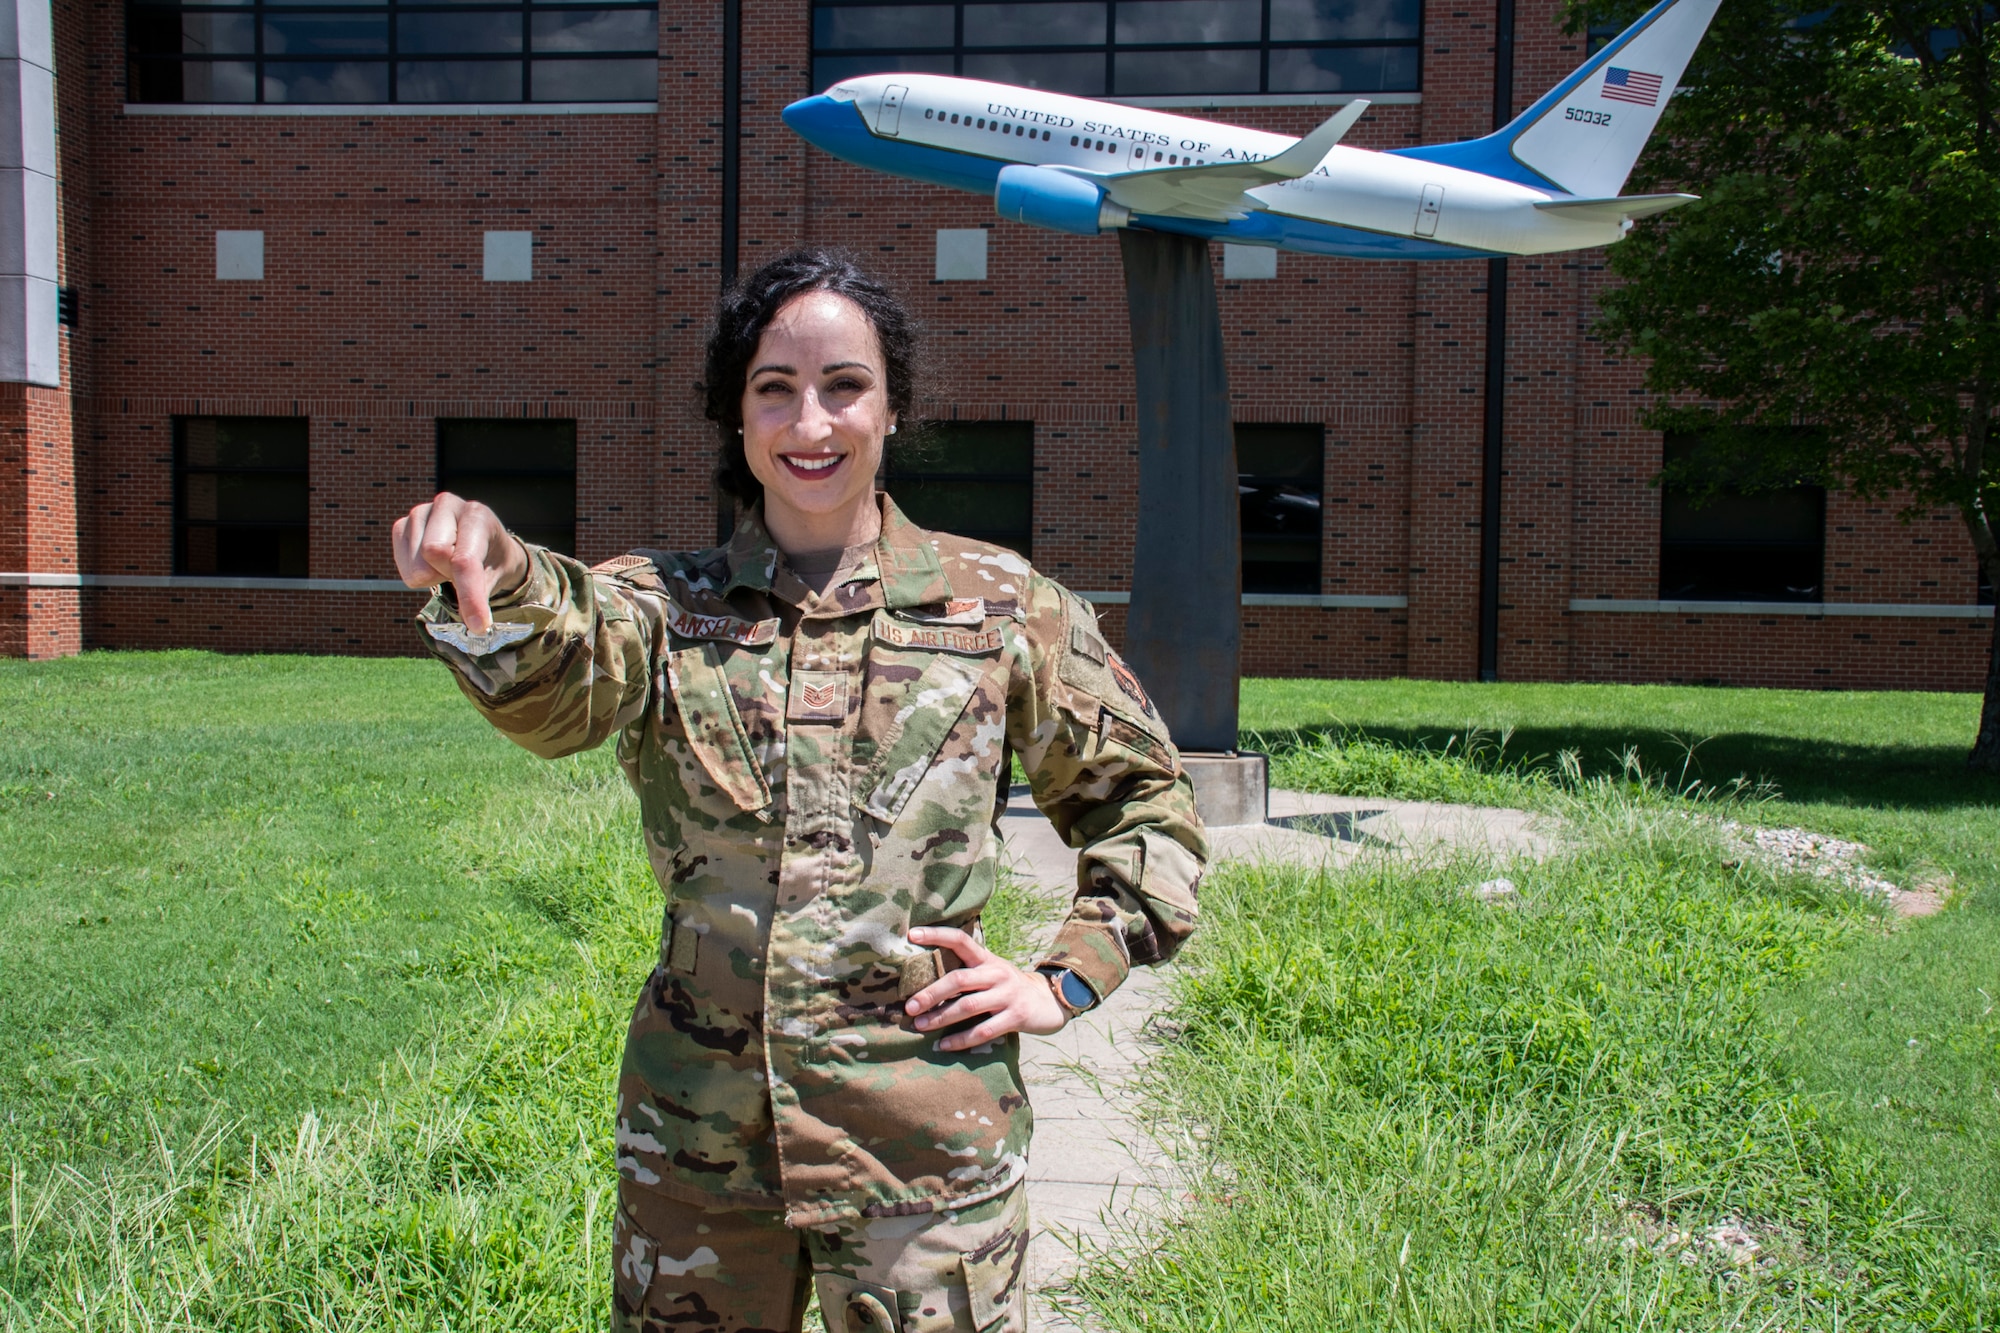 Tech. Sgt. Carola Anselmi, 73d Airlift Squadron flight attendant, poses for a photo at Scott Air Force Base, Ill., August 7, 2022. (U.S. Air Force photo by SSgt. Brooke Spenner)